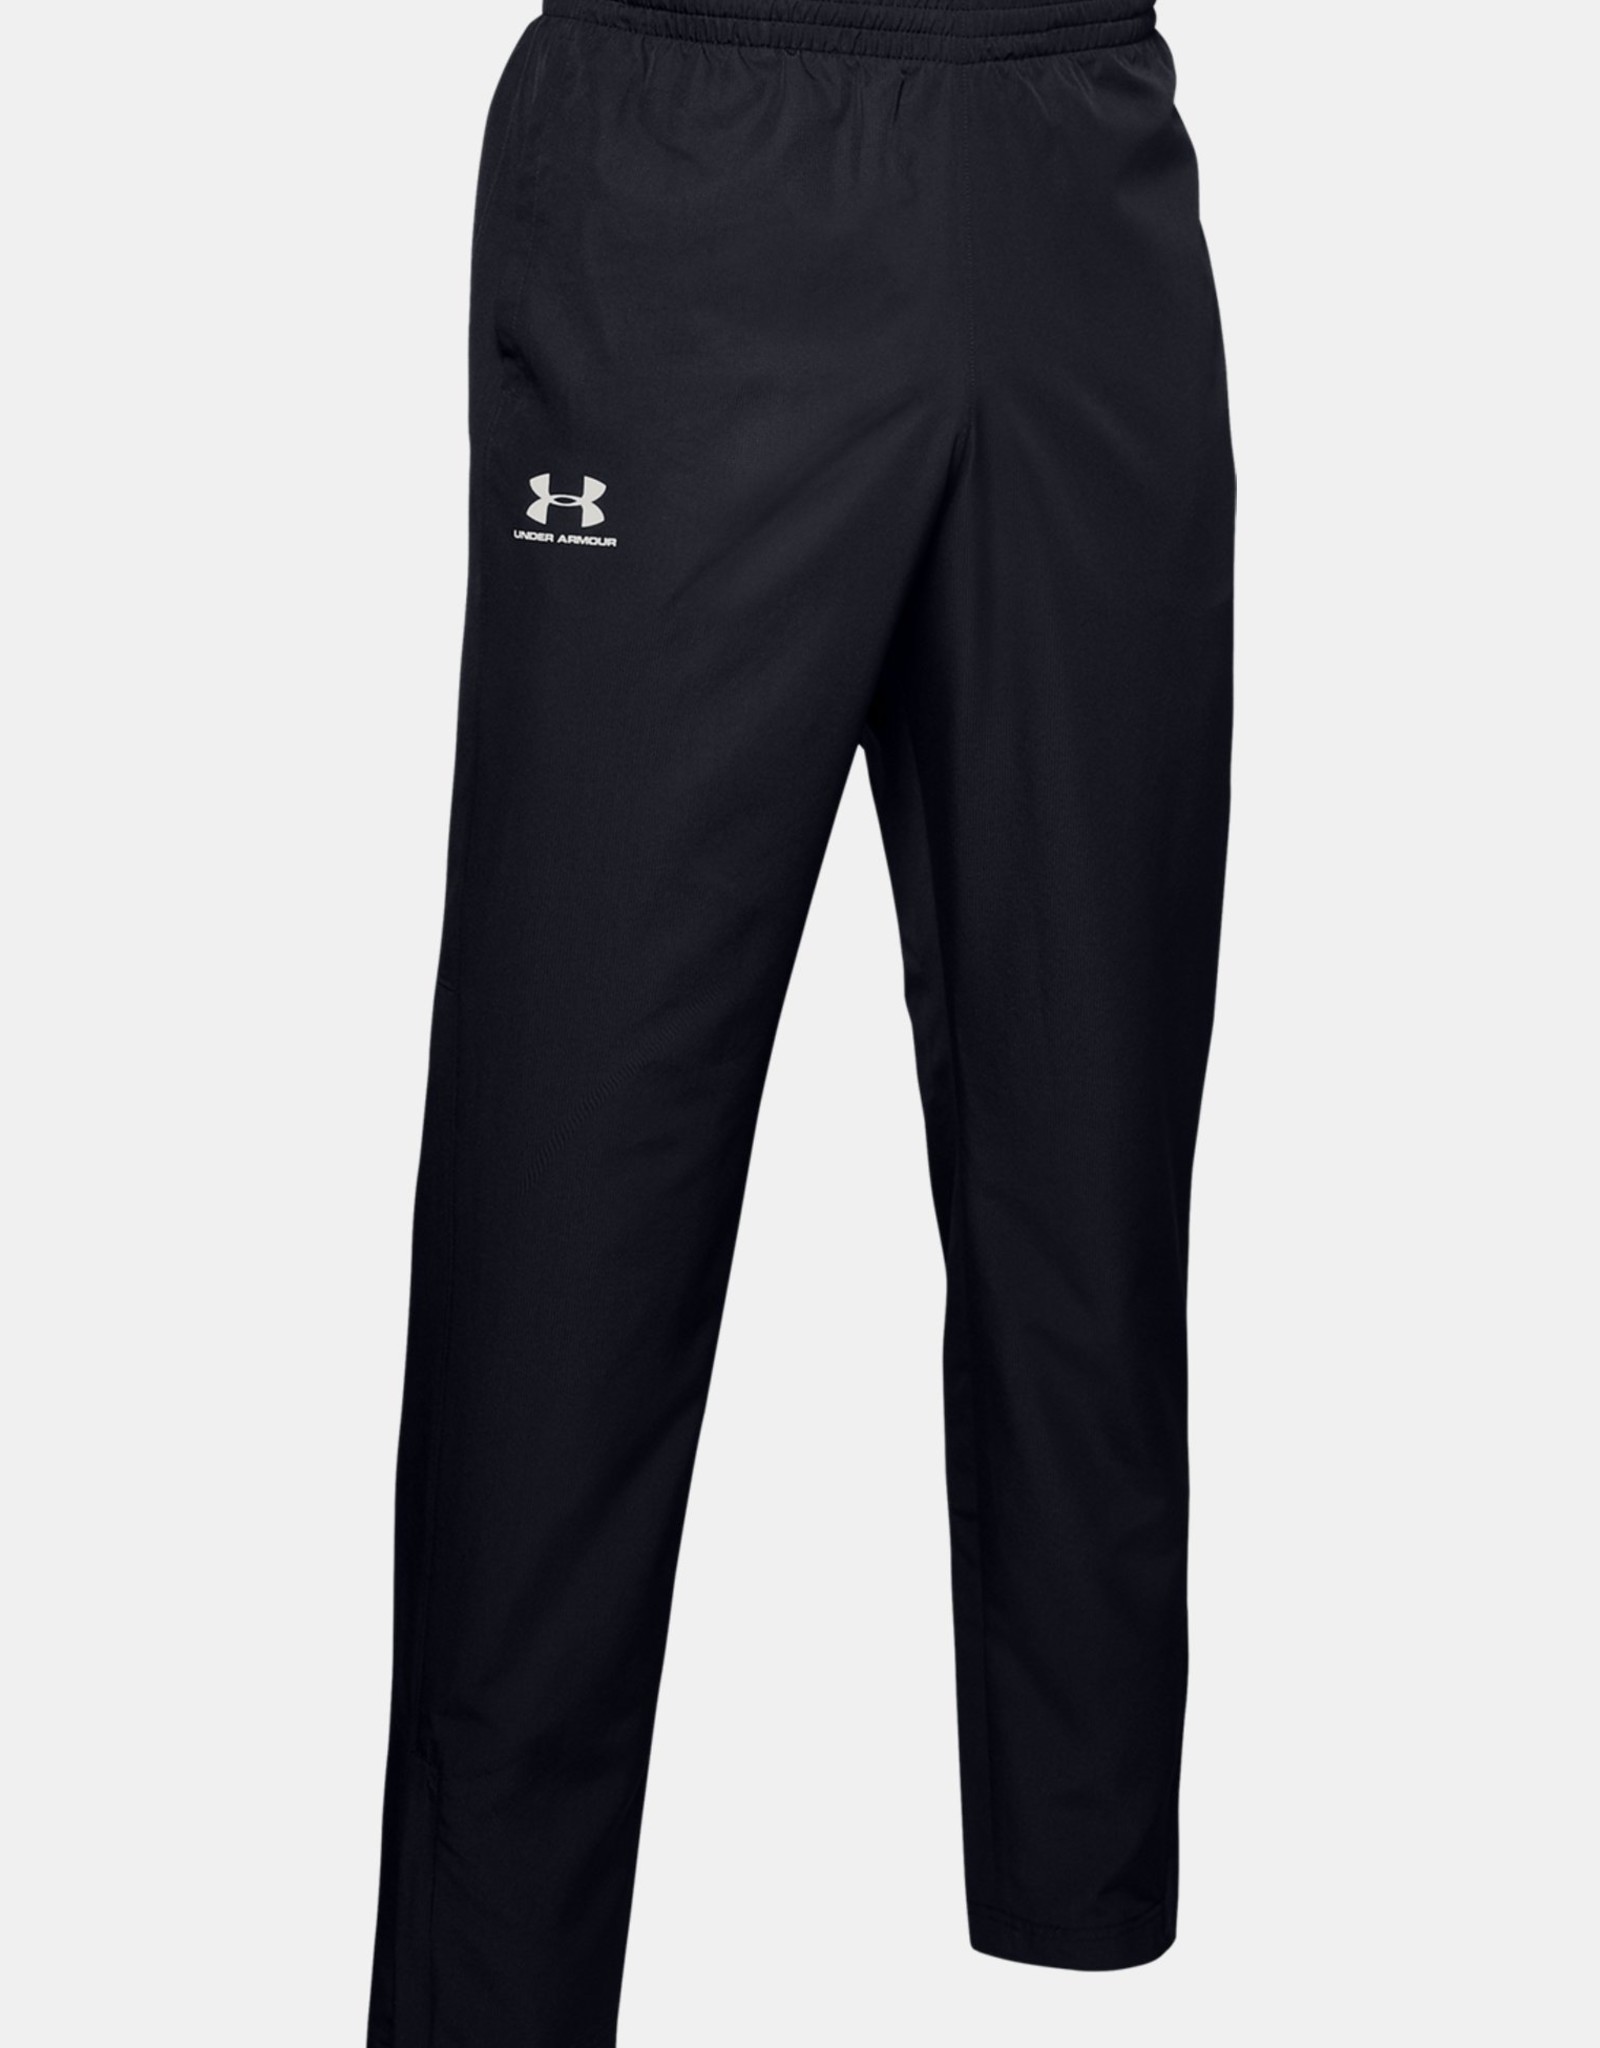 Under Armour Vital Woven Pants Black 1352031-001 - Free Shipping at LASC